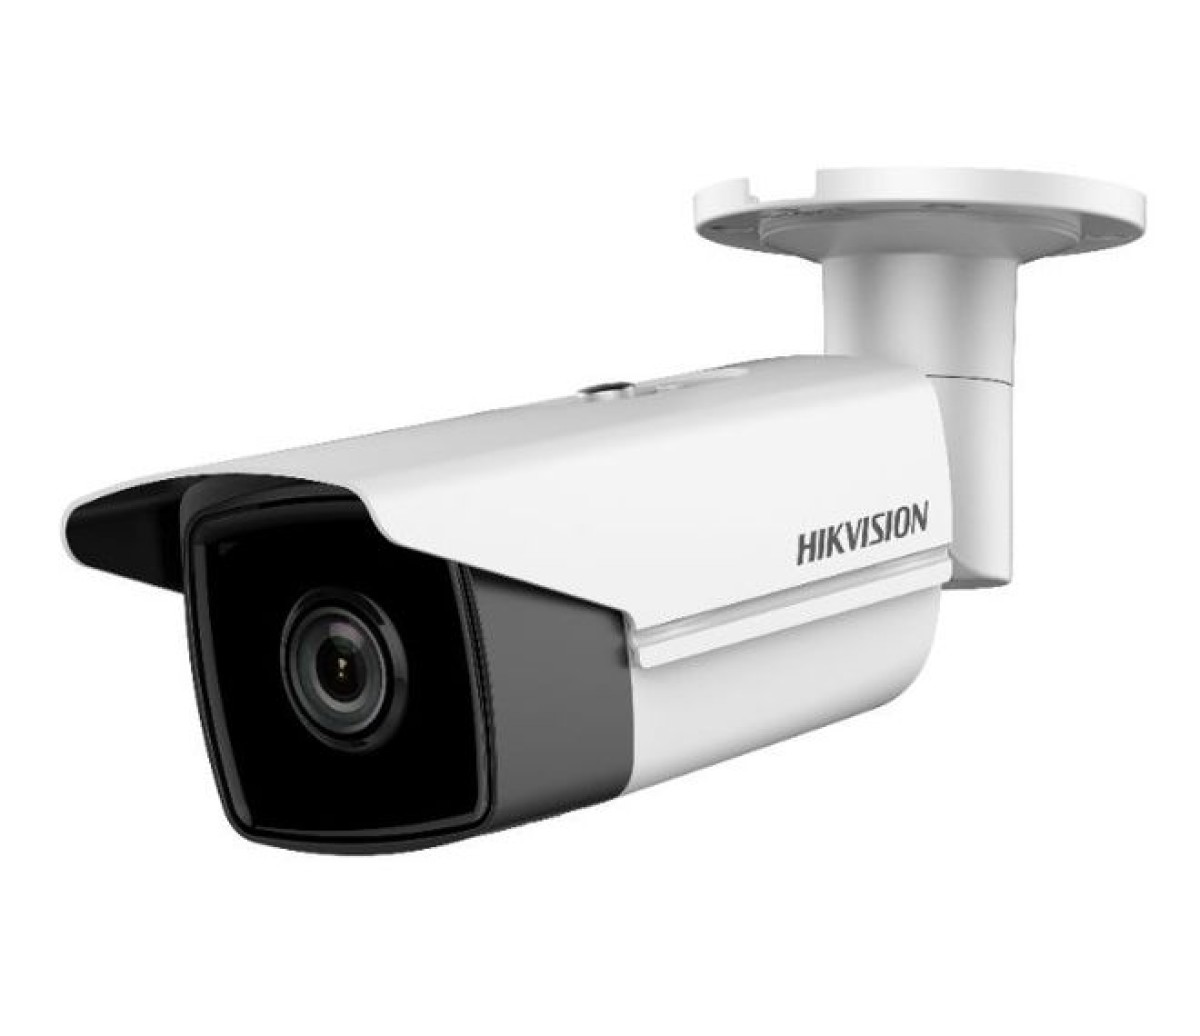 IP-камера Hikvision DS-2CD2T25FHWD-I8 (2.8) 256_221.jpg